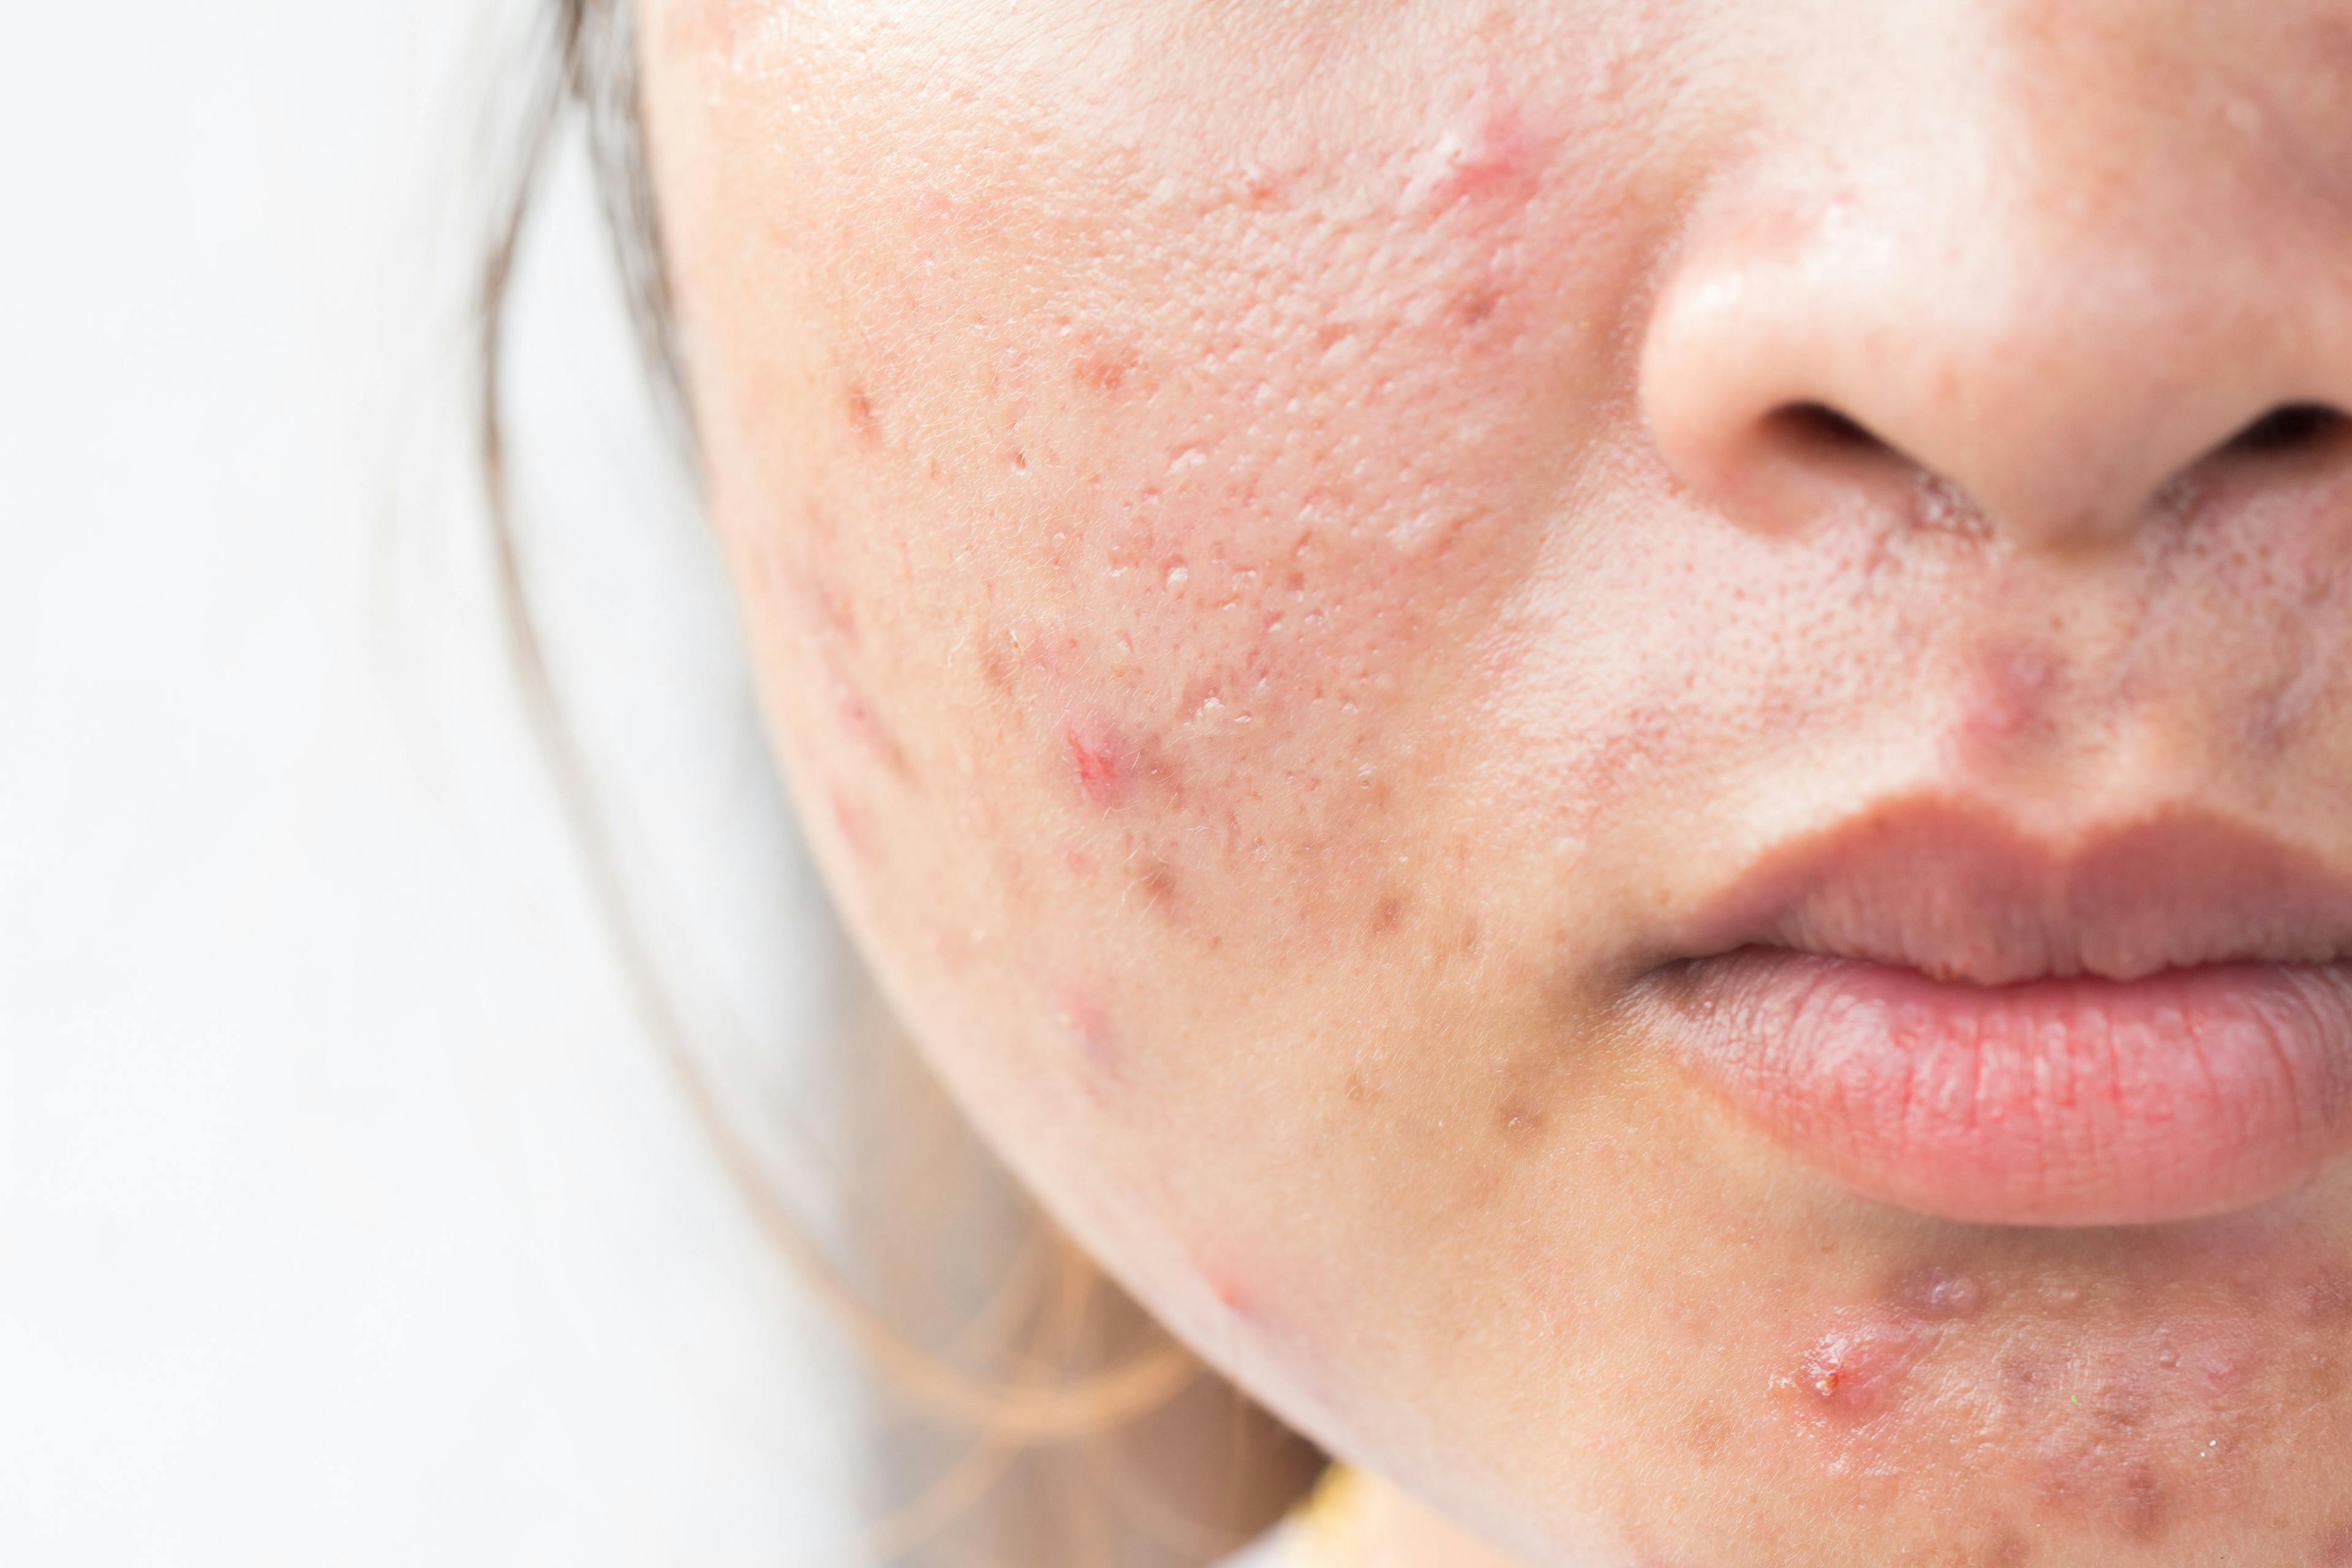 IDP-126 Gel Shows Promising Results In Moderate-to-Severe Acne Treatment